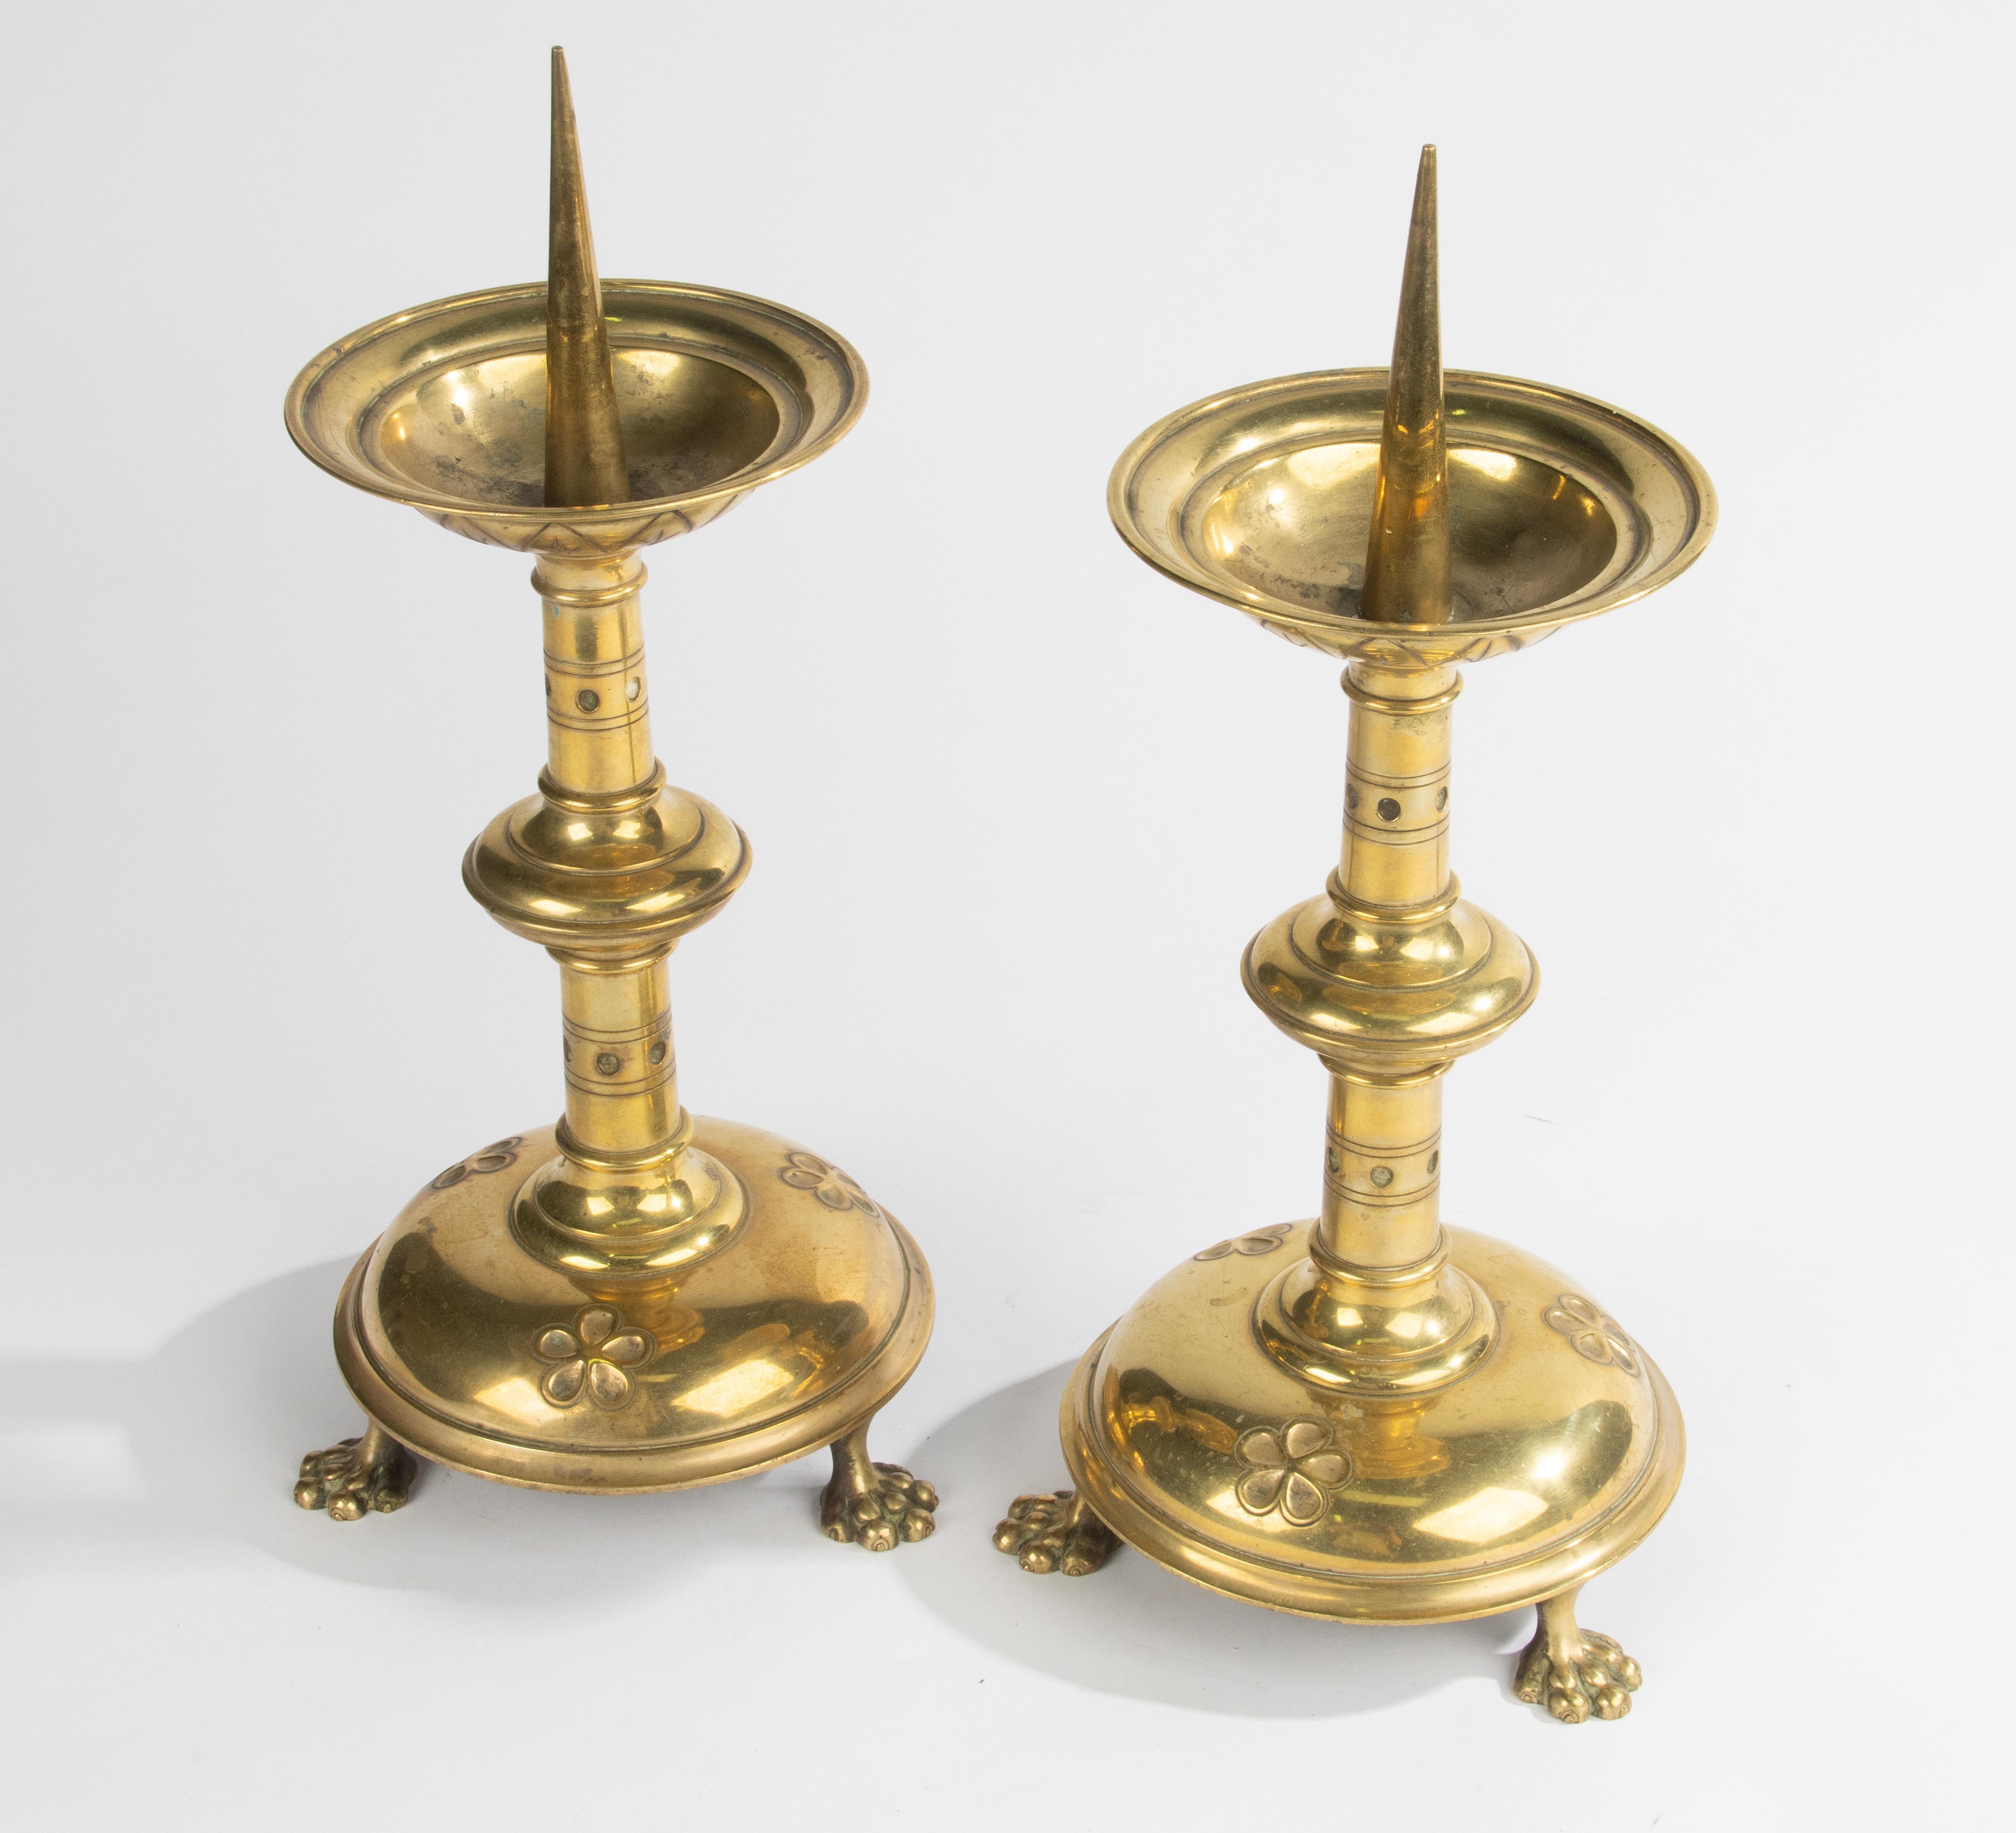 A beautiful pair of antique brass candlesticks.
Gothic style. The candlesticks are in good condition. Beautiful color and shine. Sturdy and solid. 
Estimated age and origin: France, circa 1890-1900.

Dimensions: 39 cm high and Ø18 cm
Free shipping